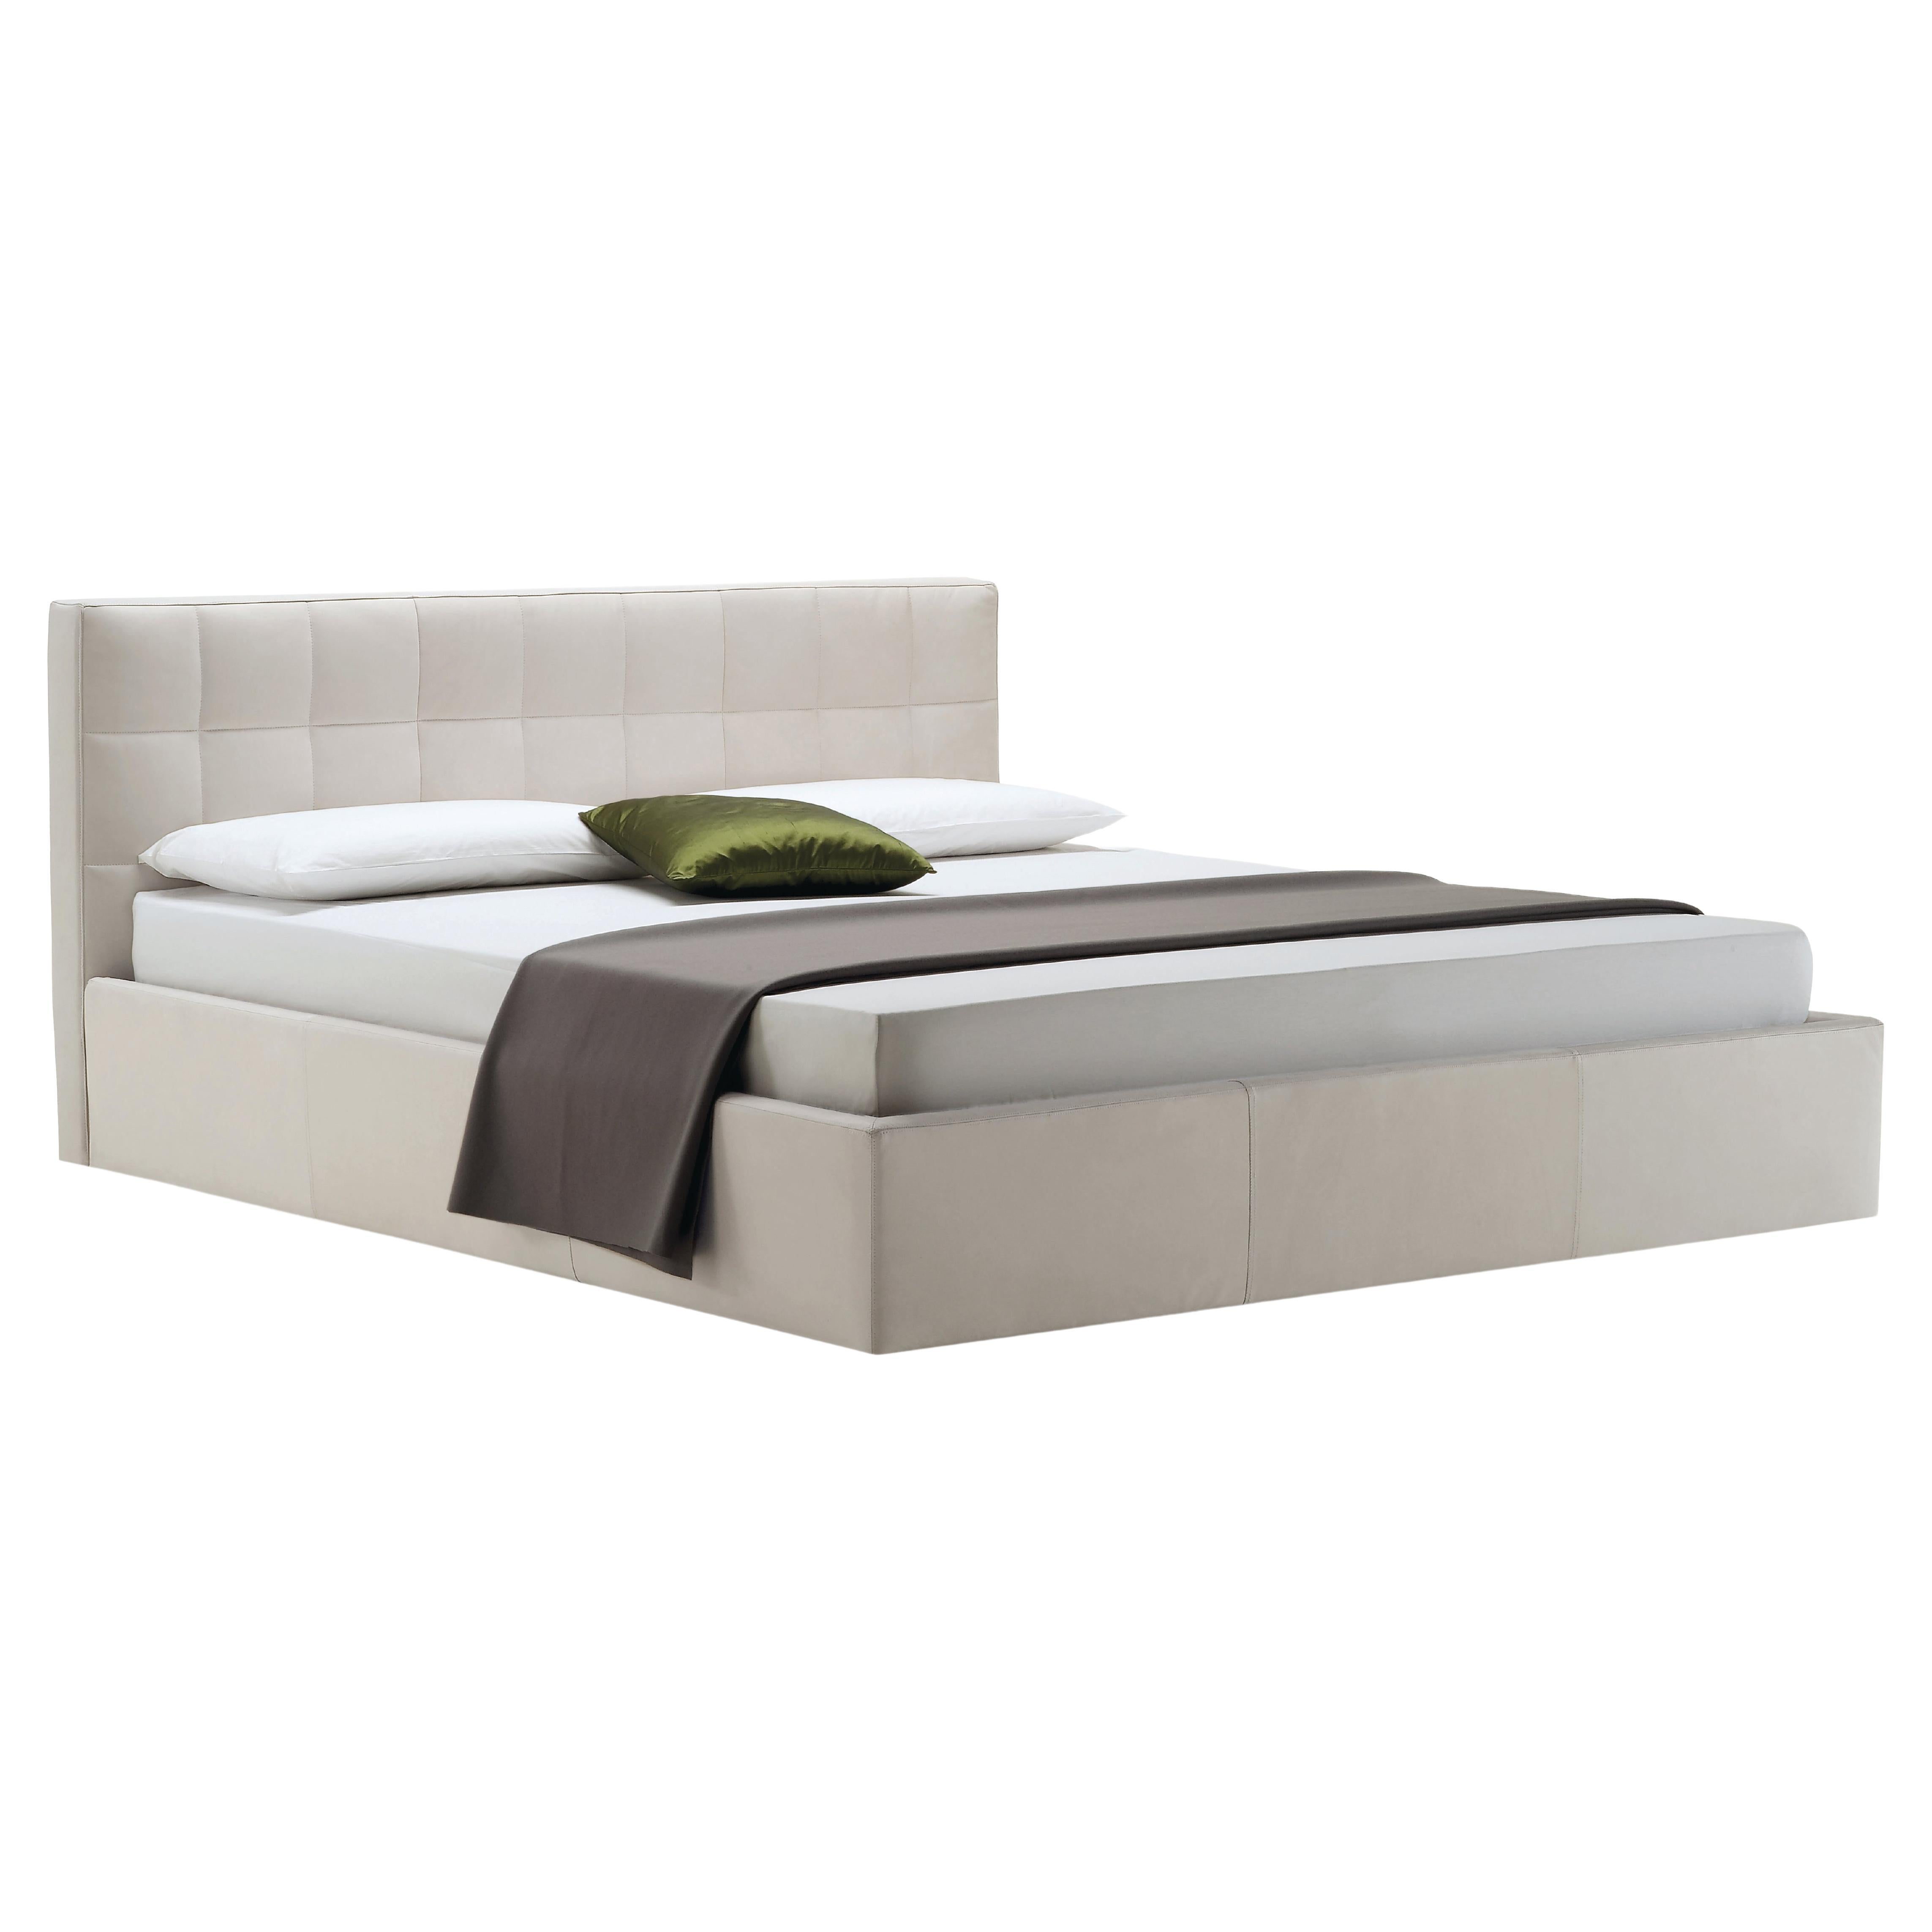 Zanotta Small Box Bed without Container Unit in Beige Upholstery & Steel Frame For Sale